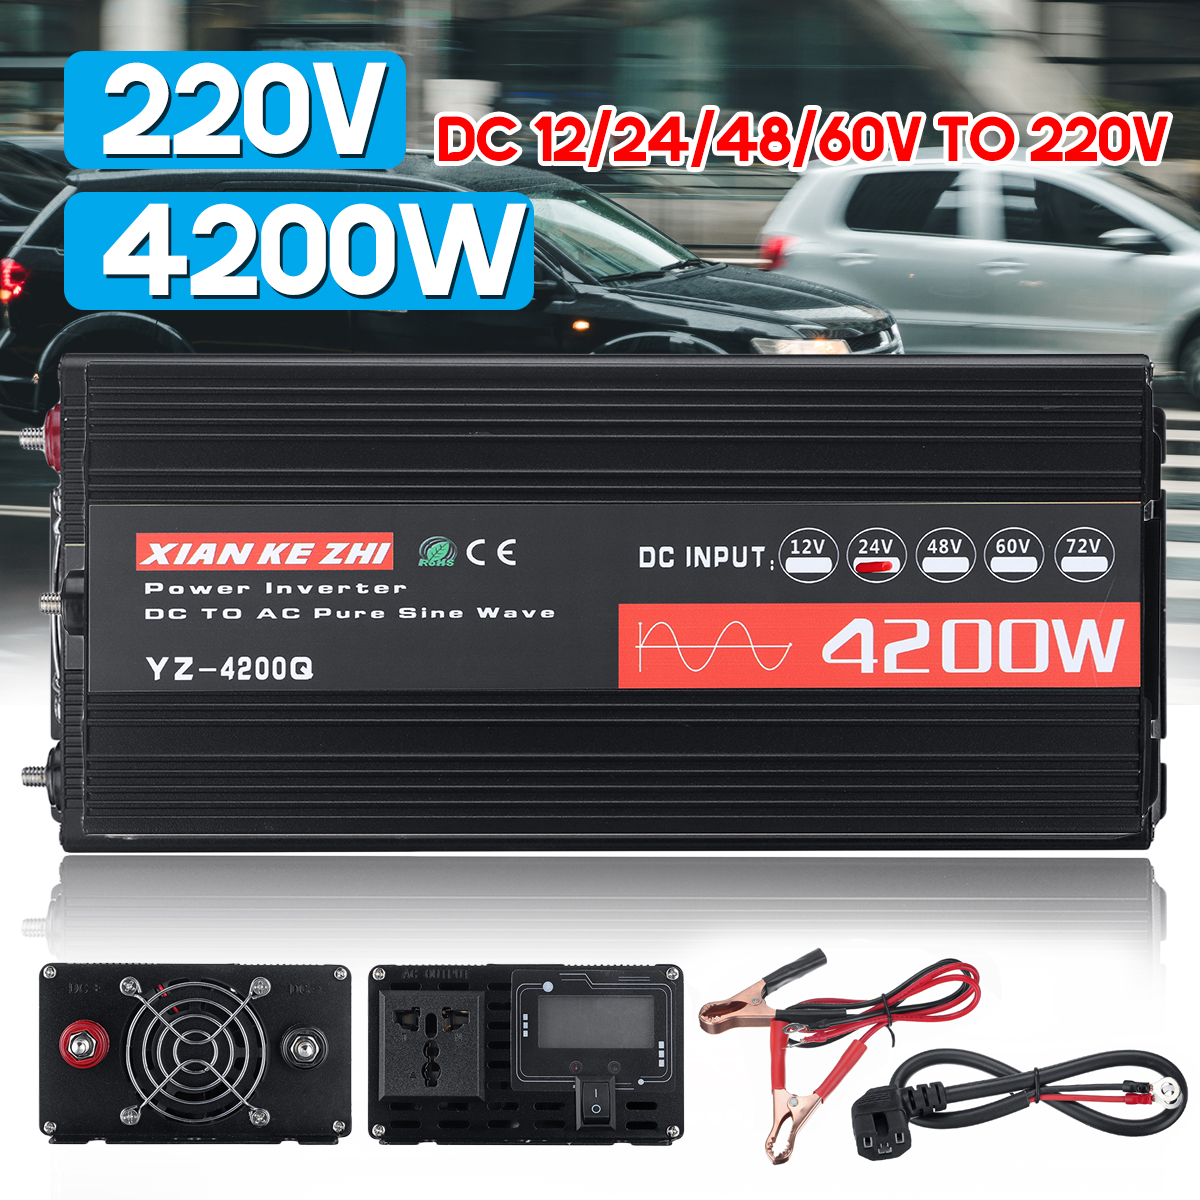 4200W/2600W LCD Display Pure Sine Wave Inverter 12/24/48/60V TO 220V Hpusehold Car USB High Power Inverter W/ 6 Protections Converter